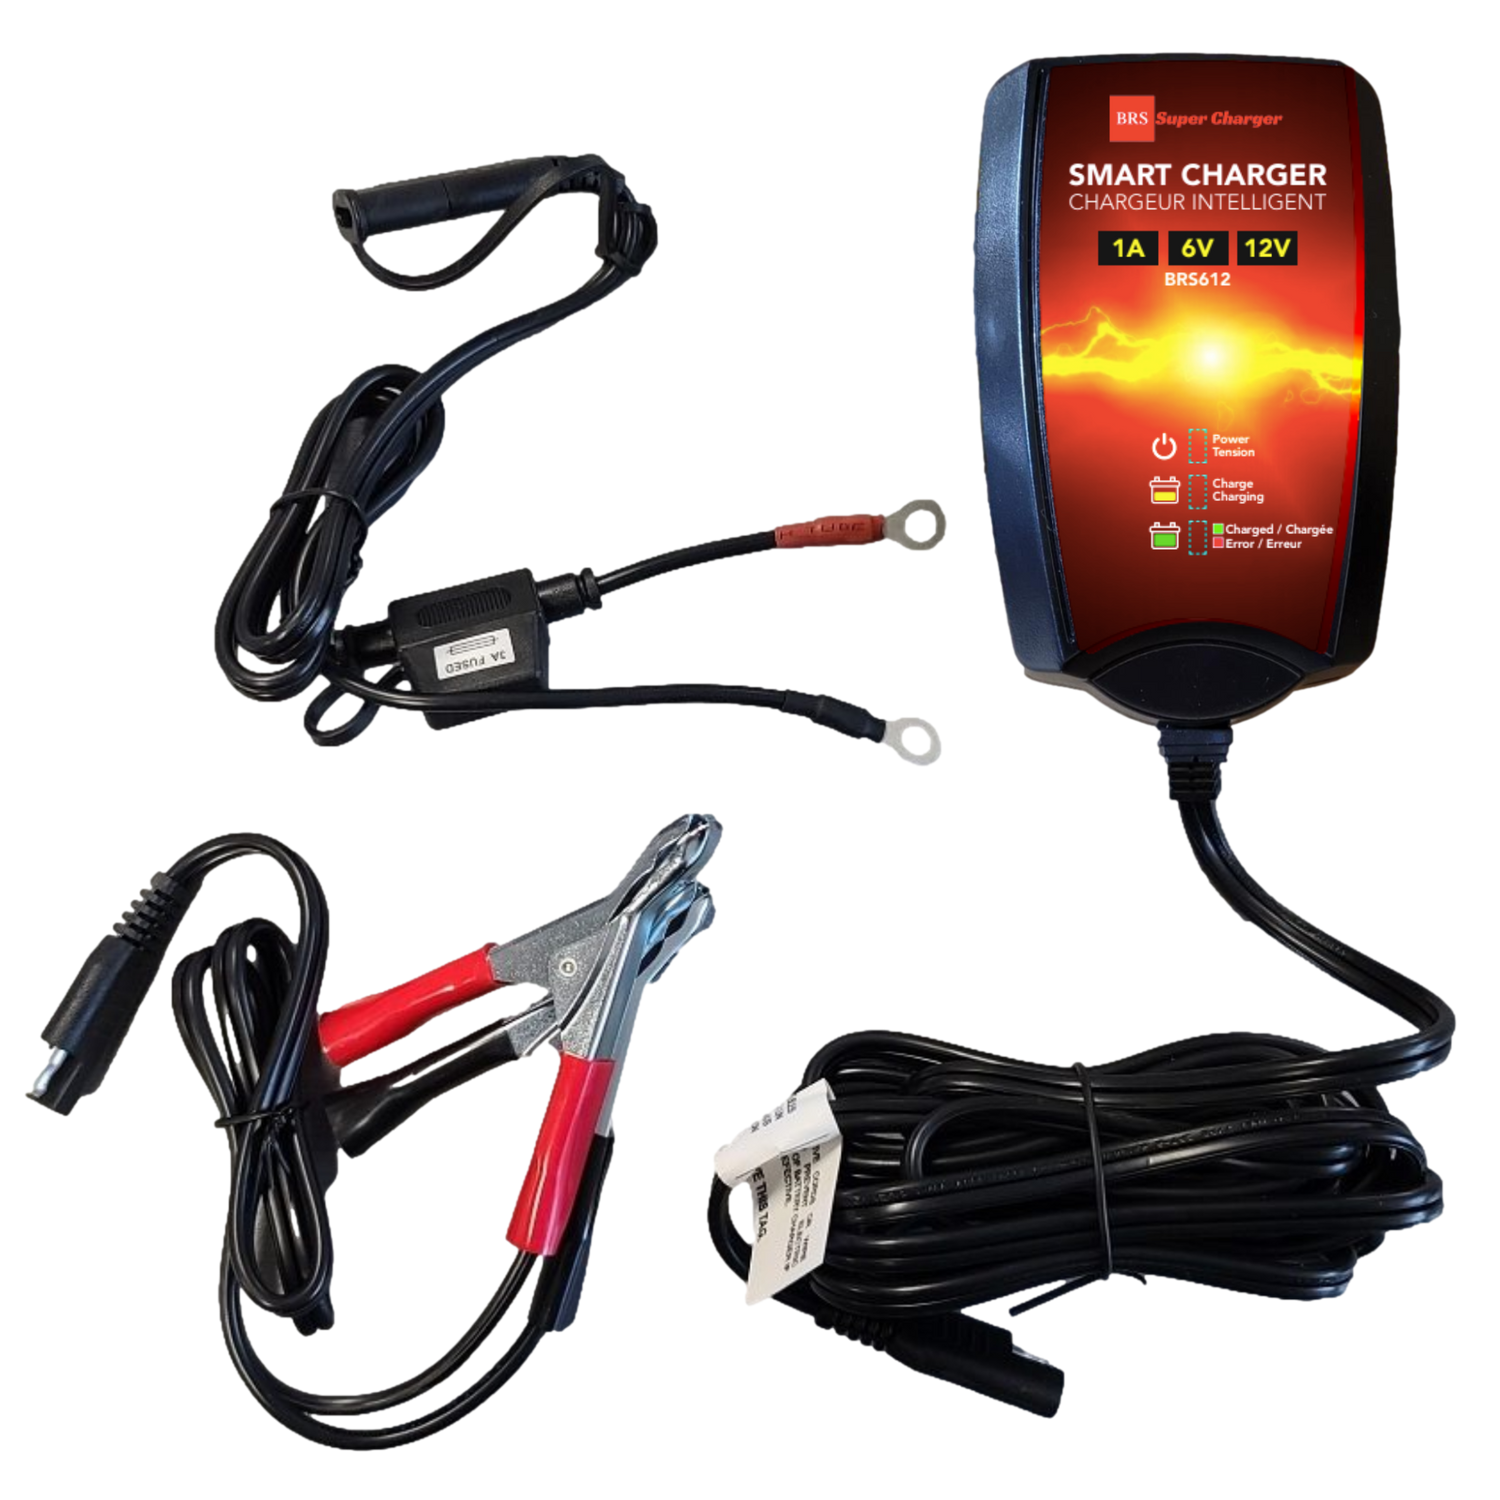 High Performance BRS24HL-BS 2 Year Battery & Smart Charger / Maintainer Combo Bundle Kit 12v Sealed AGM PowerSports Battery - BRS Super Battery